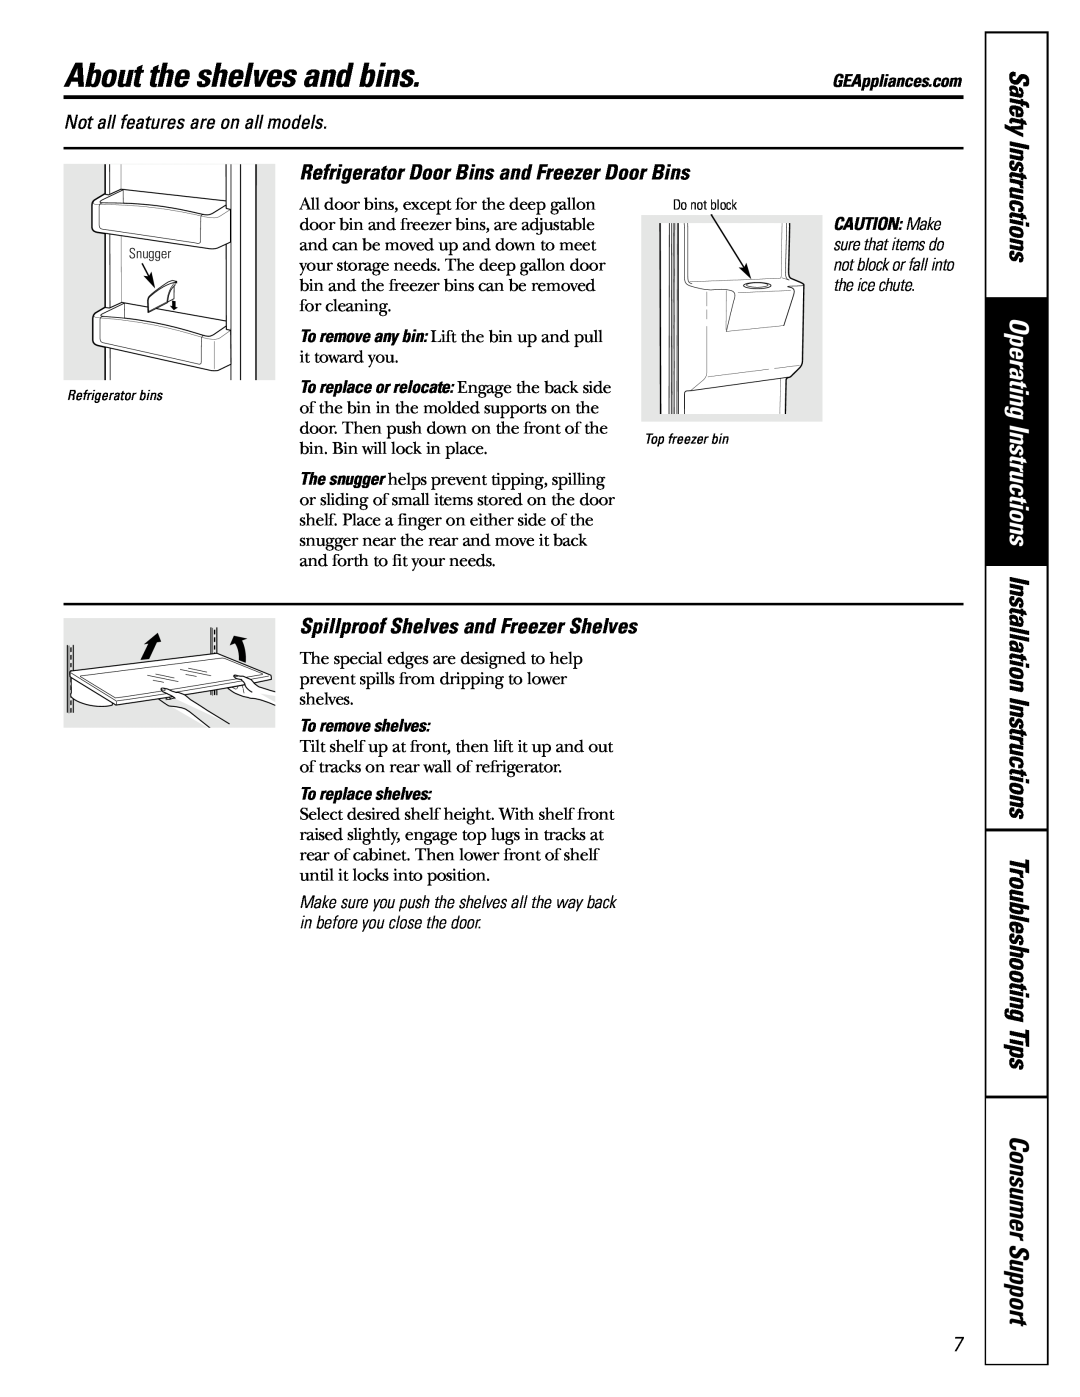 GE 48, 42 owner manual About the shelves and bins, Safety, Installation Instructions Troubleshooting Tips Consumer Support 